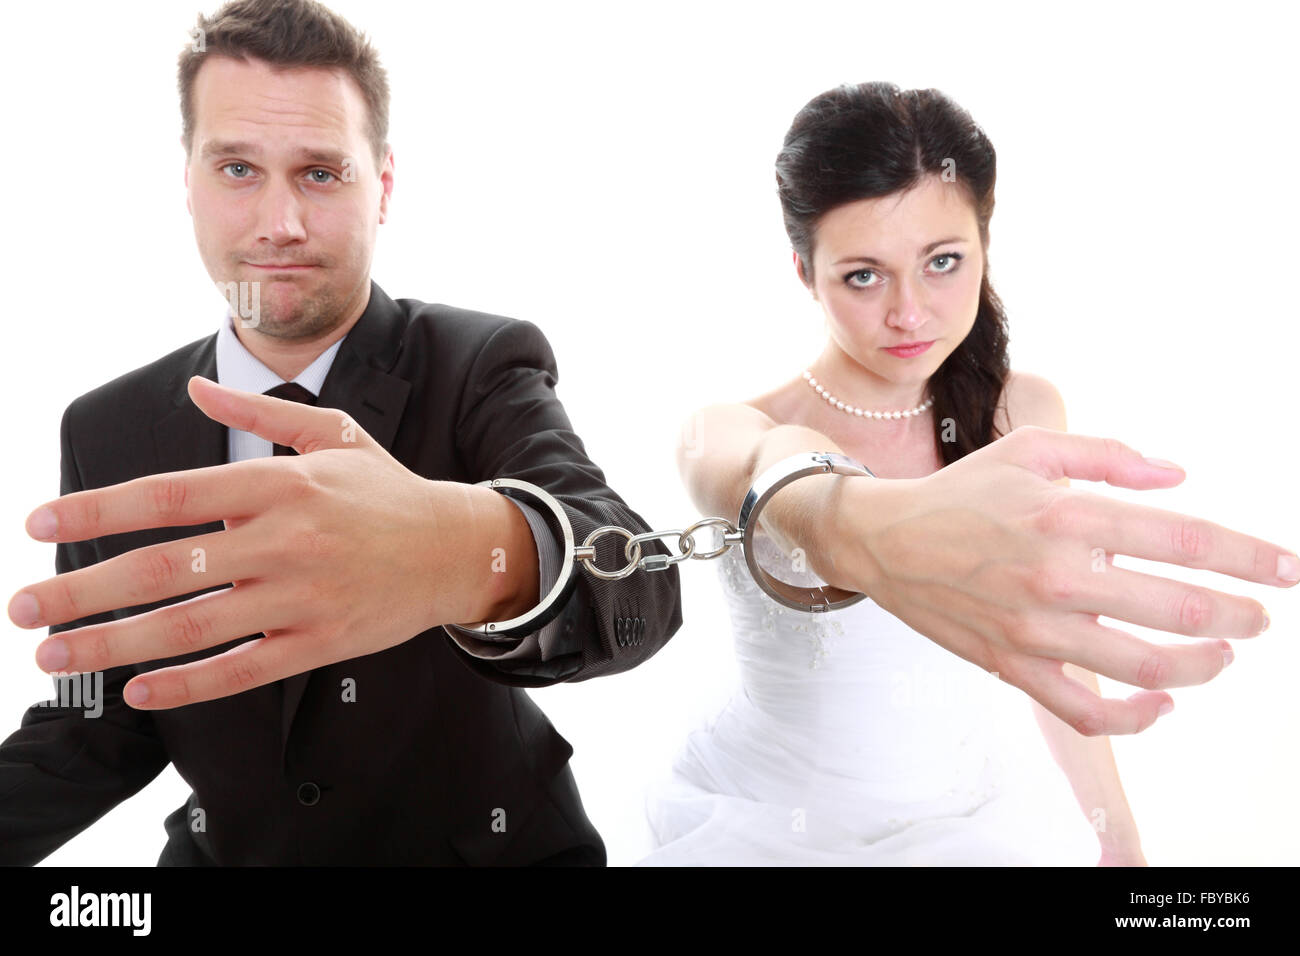 Break up ending relationship between husband and wife. Couple in divorce crisis. Man woman unhappy holding hands in handcuffs. I Stock Photo